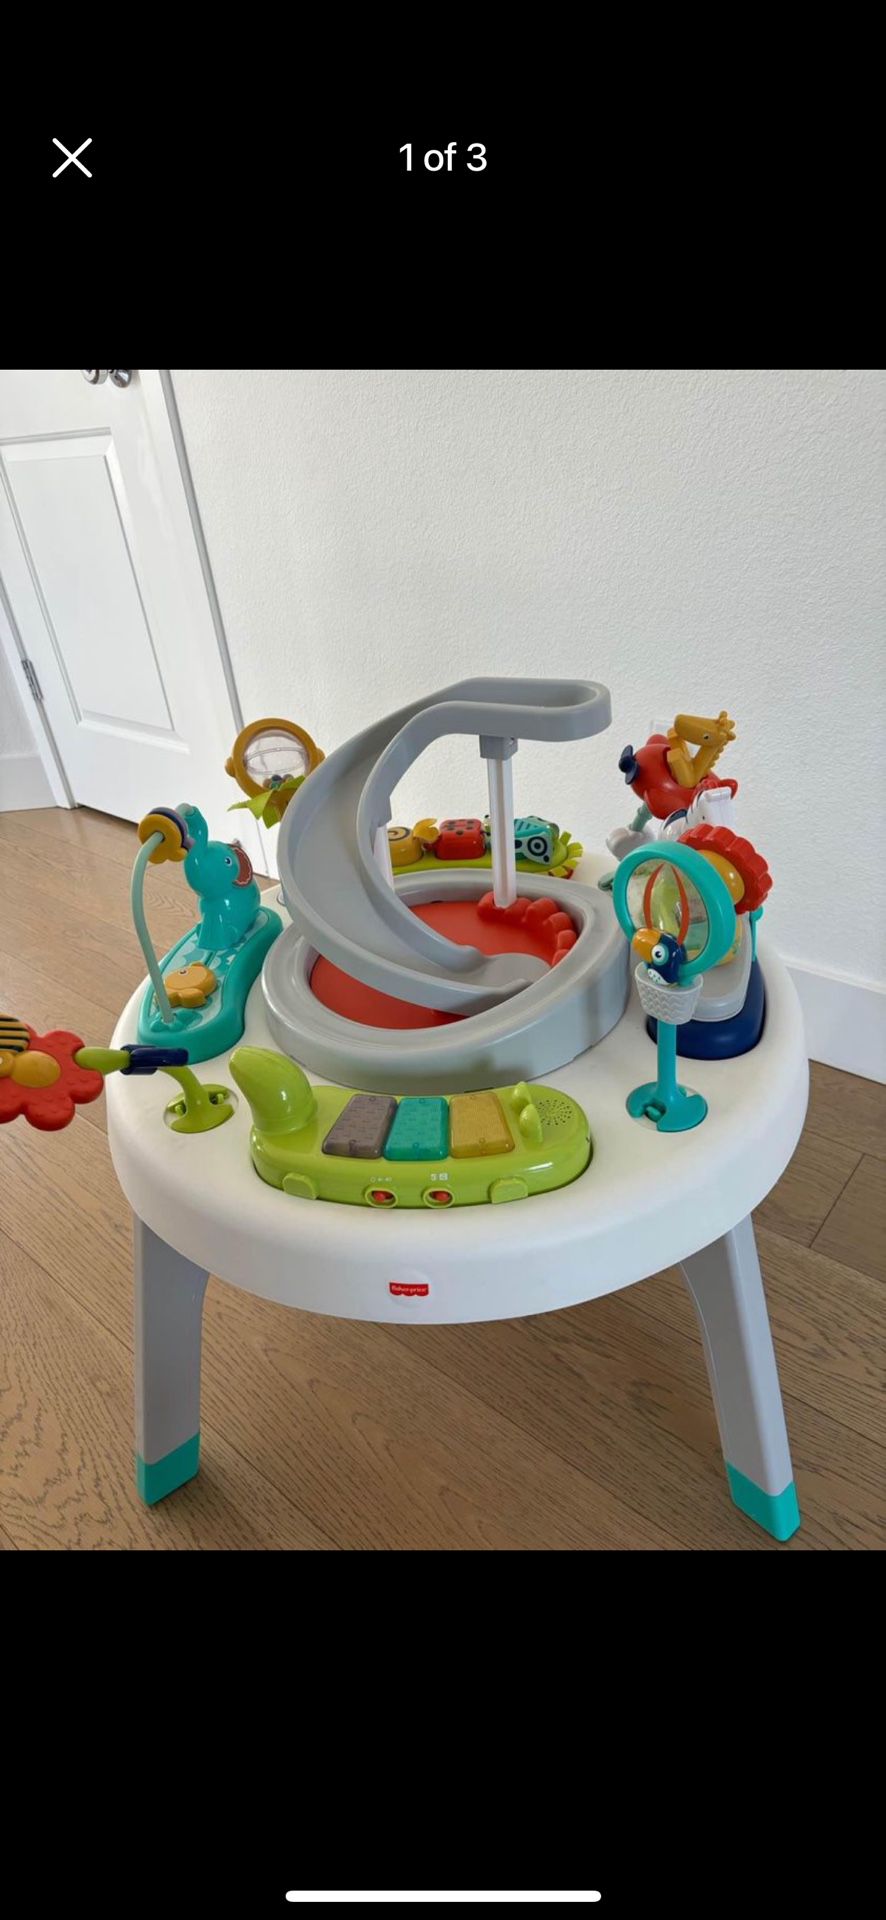 Fisher Price 2-in-1 Sit-to-Stand Activity Center Spin ‘n Play Safaris